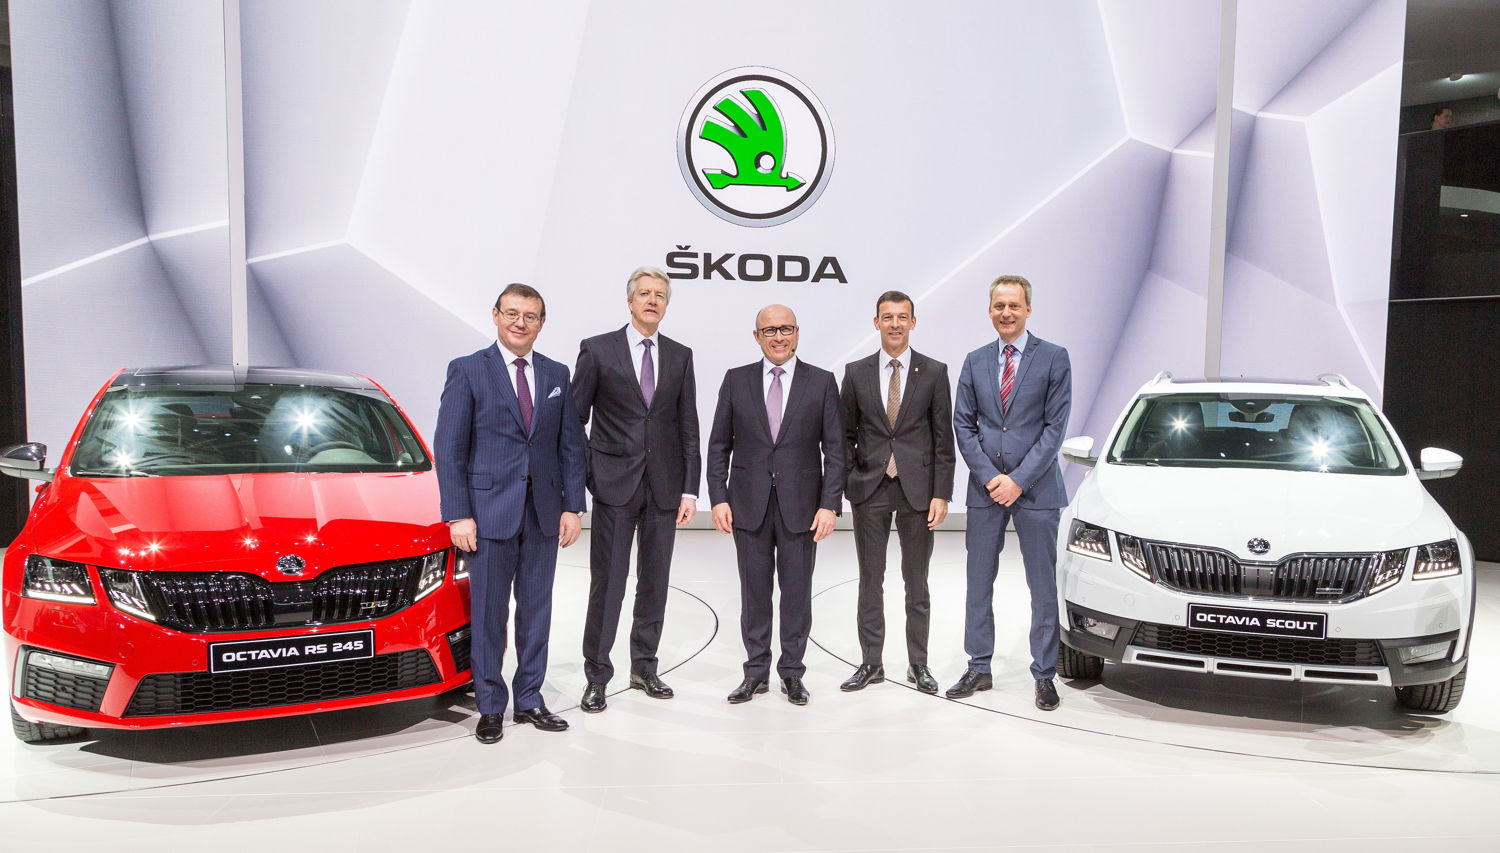 ŠKODA Board of Management at press conference on 7 March 2017 in Geneva.